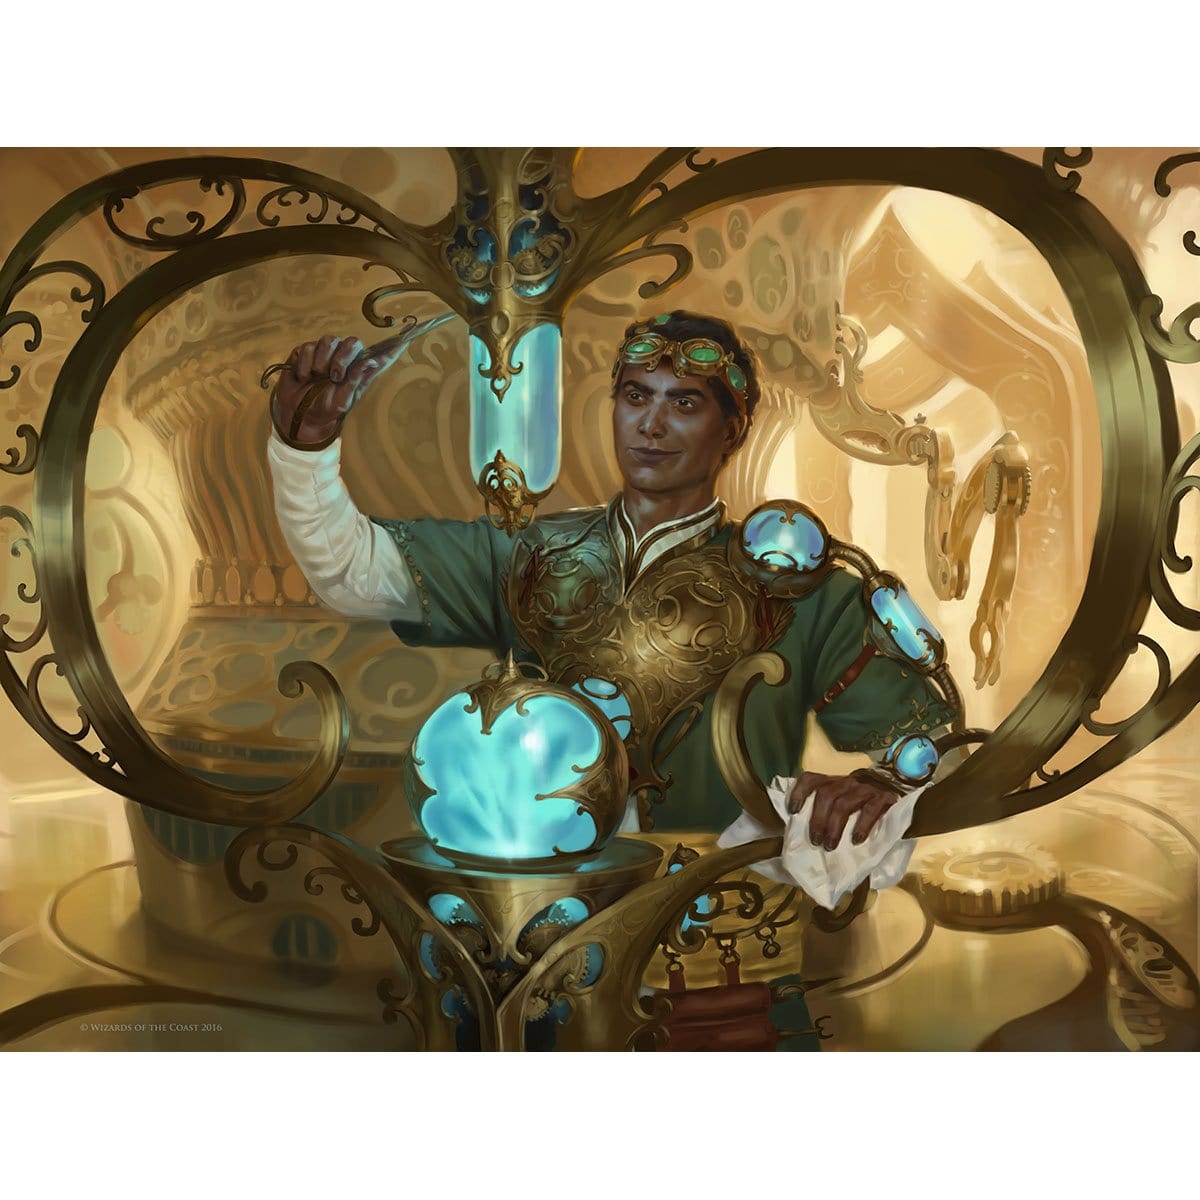 Era of Innovation Print - Print - Original Magic Art - Accessories for Magic the Gathering and other card games